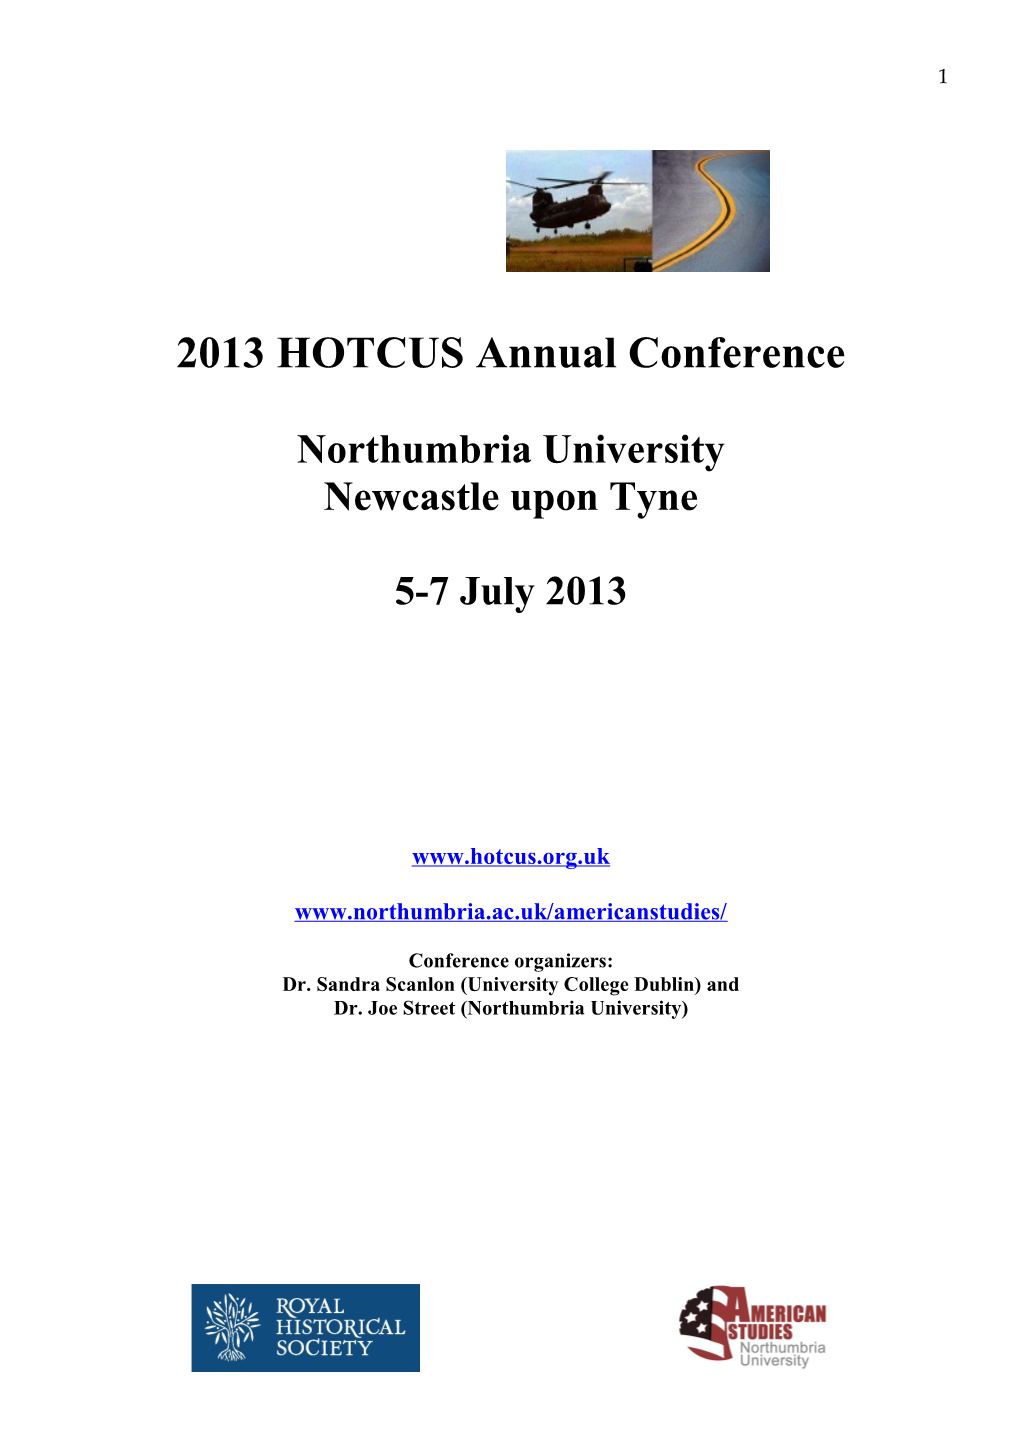 2013 HOTCUS Annual Conference